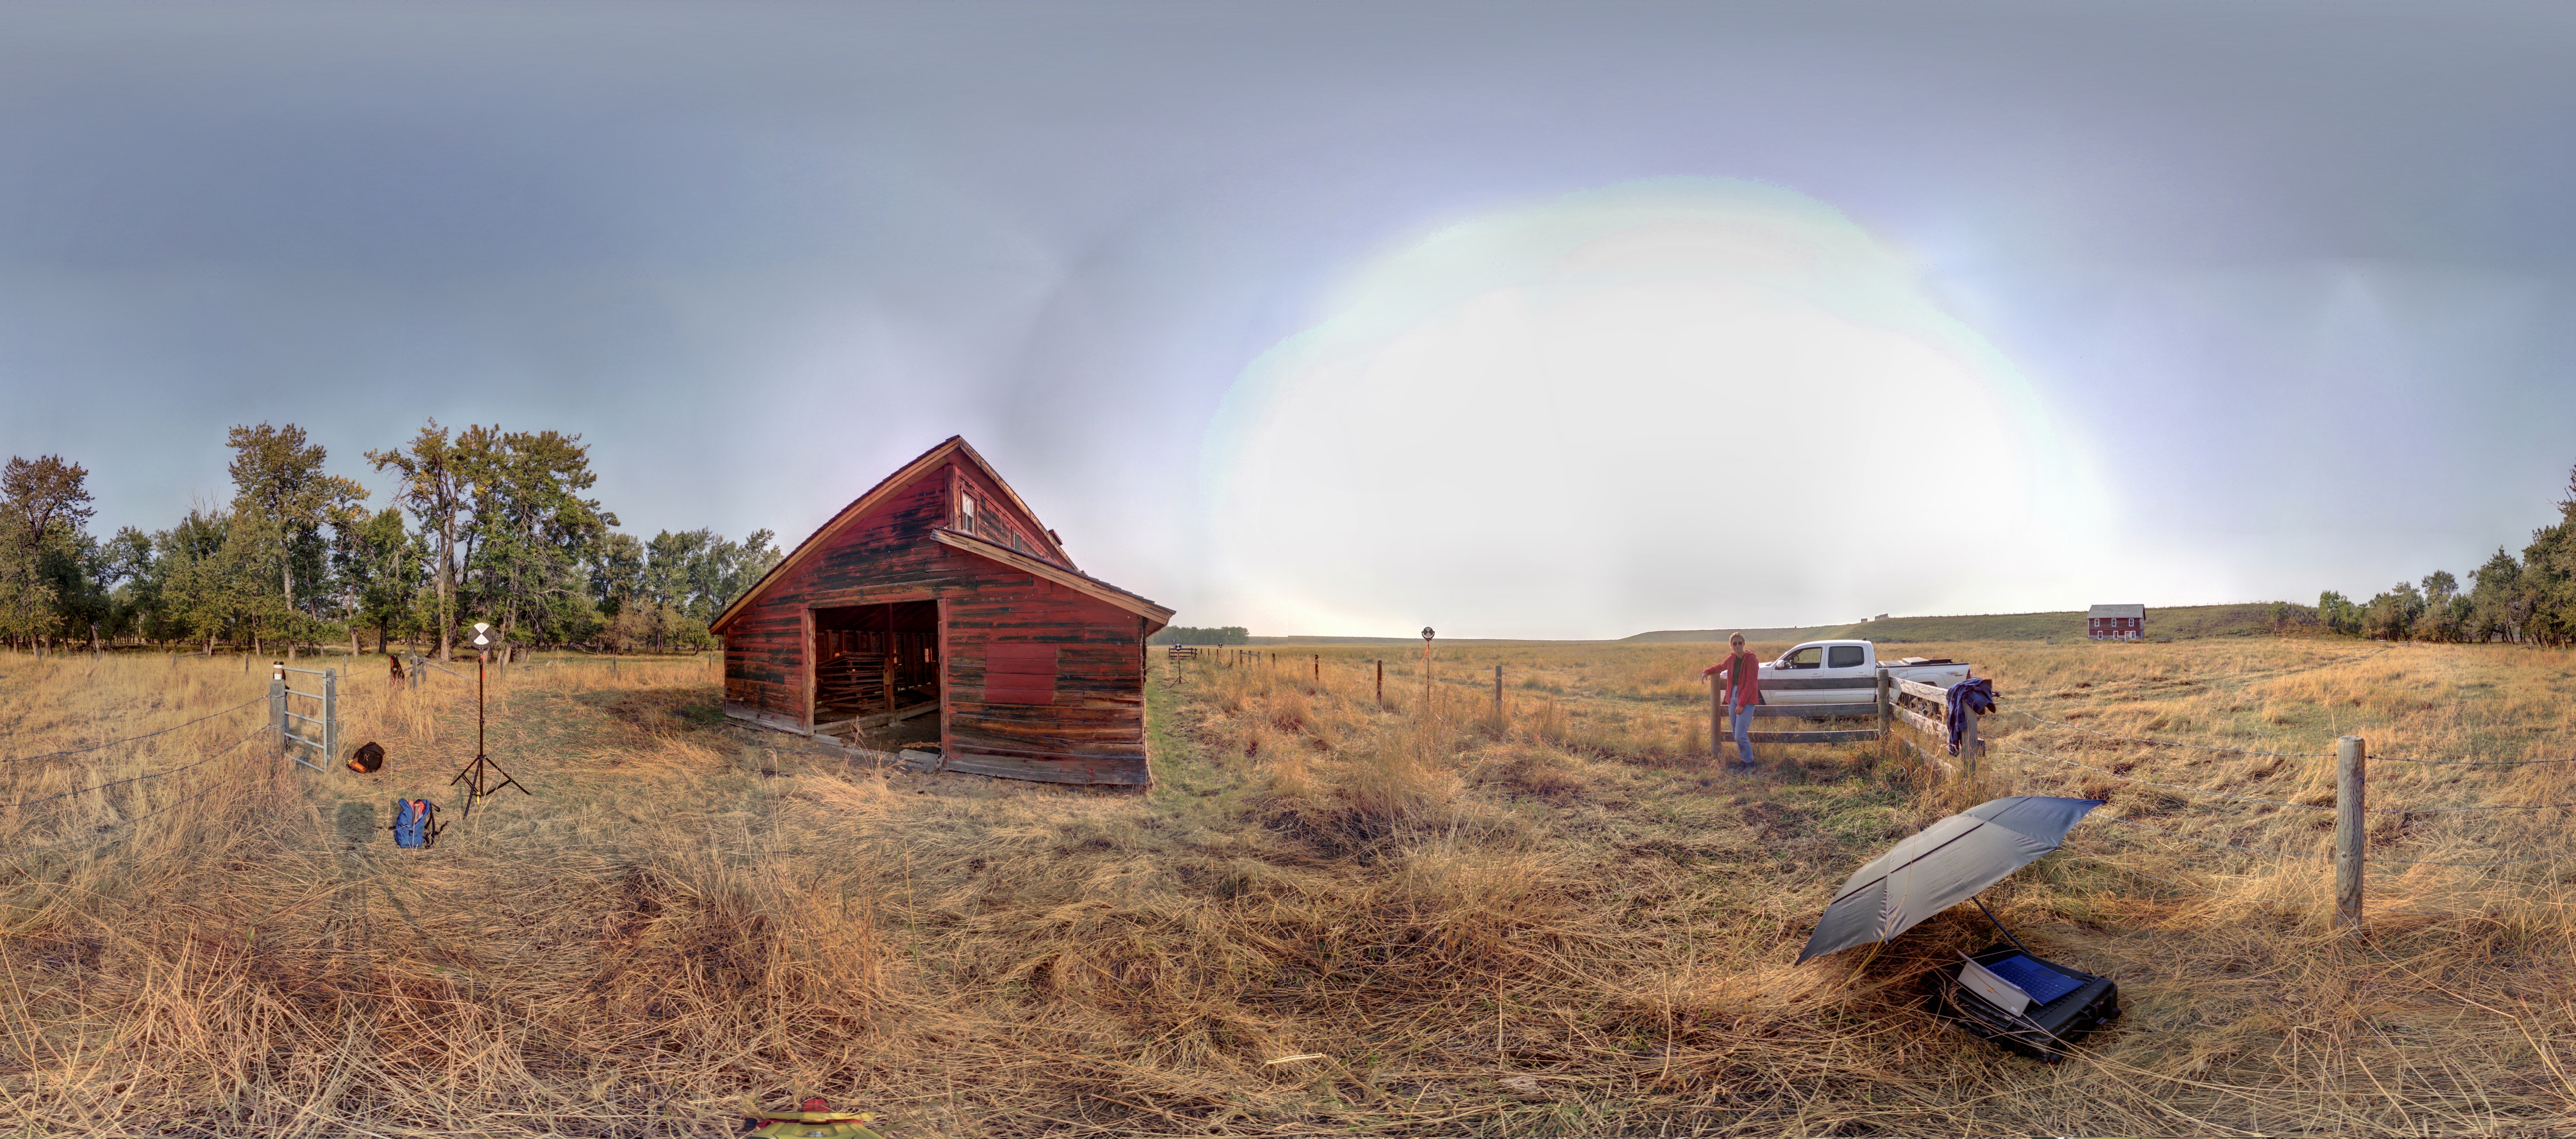 Panoramic image from scan location 1 of the exterior of the Piggery at Bar U Ranch